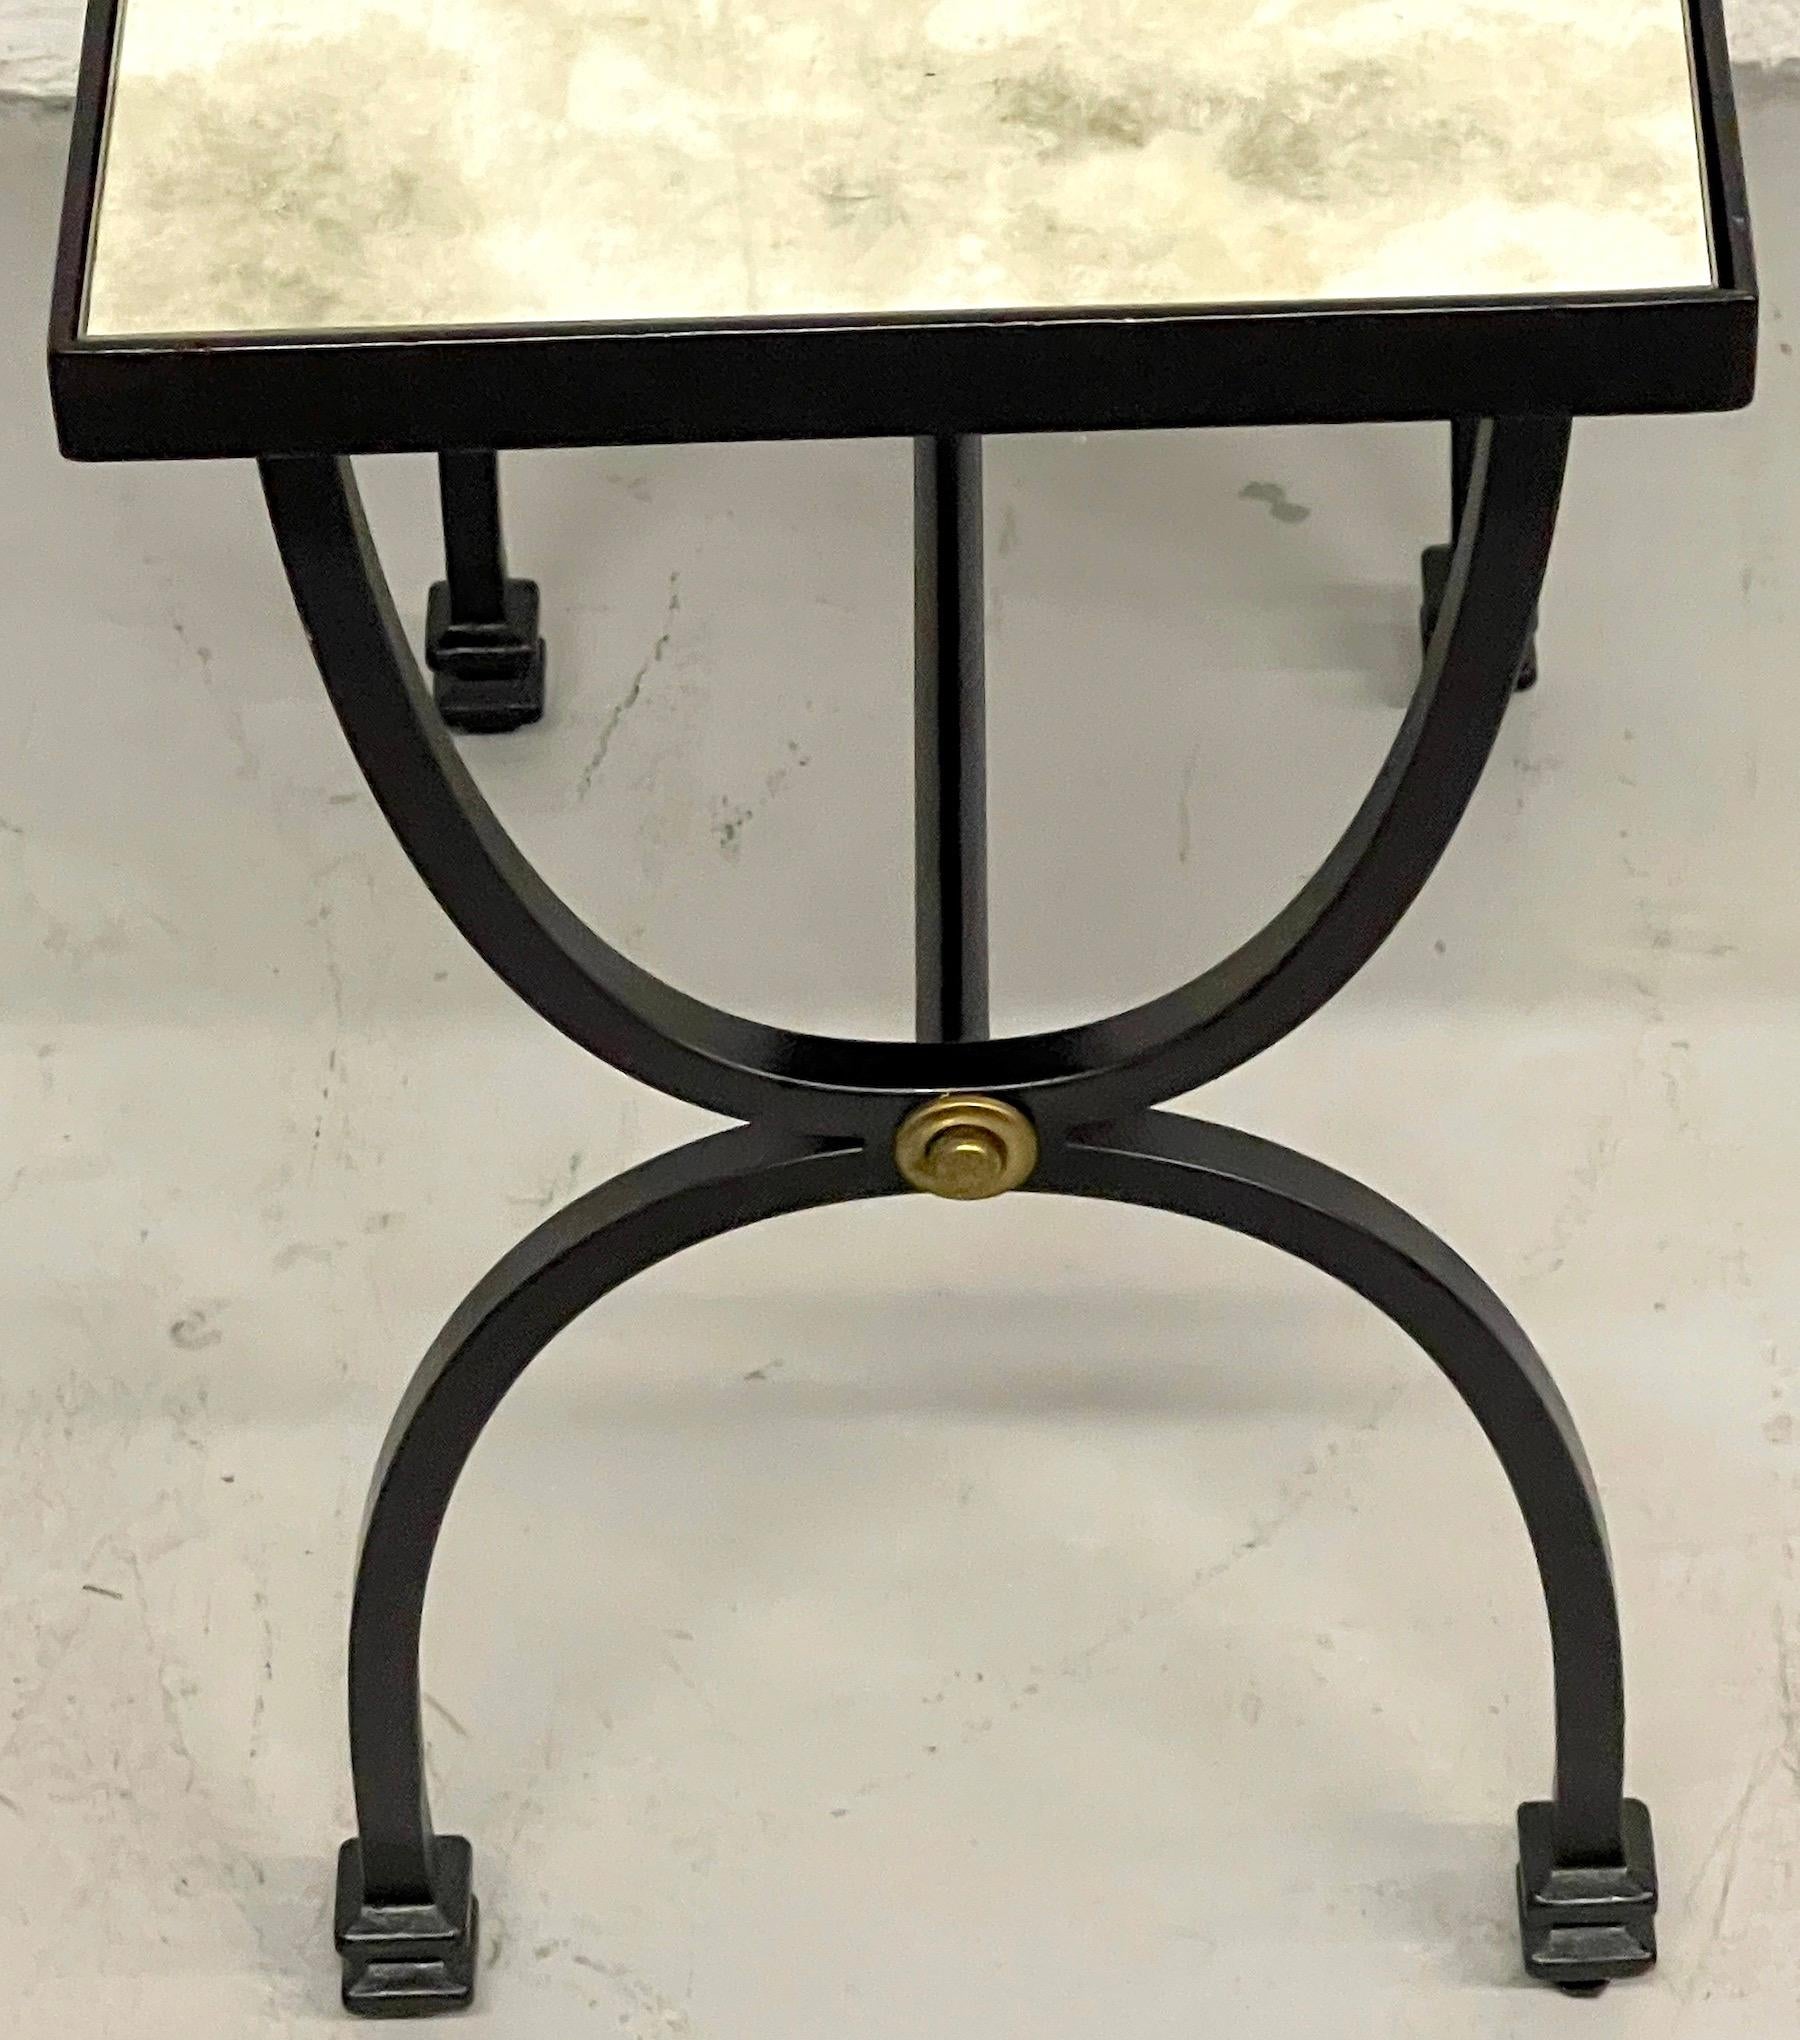 Diminutive French Modern Style Side Table, Style of Maison Jansen 1